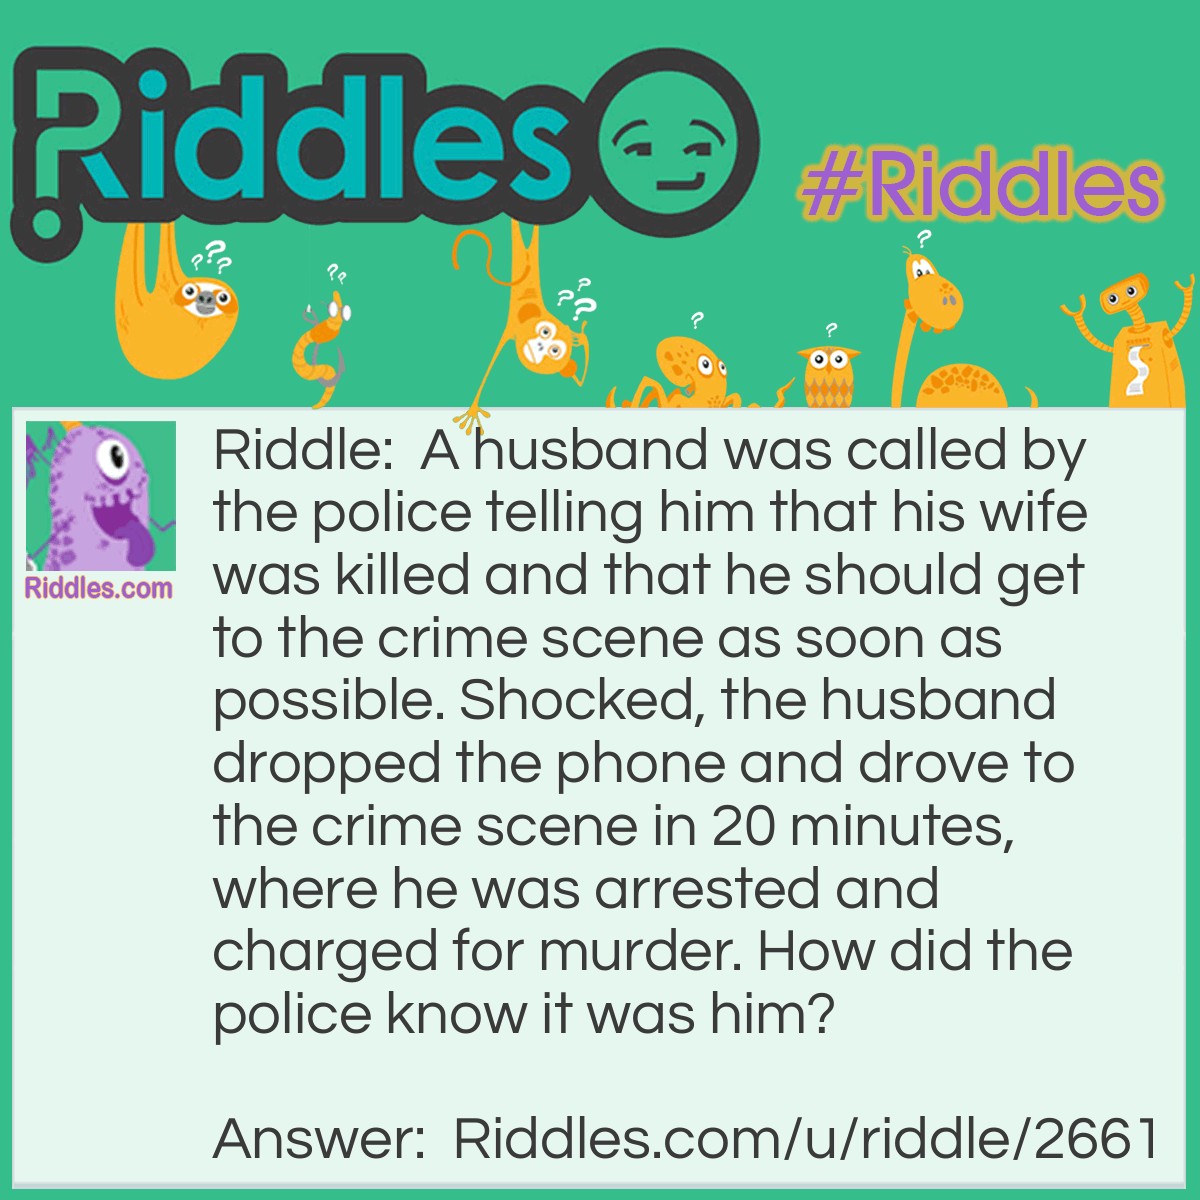 Riddle: A husband was called by the police telling him that his wife was killed and that he should get to the crime scene as soon as possible. Shocked, the husband dropped the phone and drove to the crime scene in 20 minutes, where he was arrested and charged for murder. How did the police know it was him? Answer: The police told him to get to the crime scene, but they didn't specify where. The husband couldn't have known where the crime scene was unless he'd been there when the wife was dead or dying.